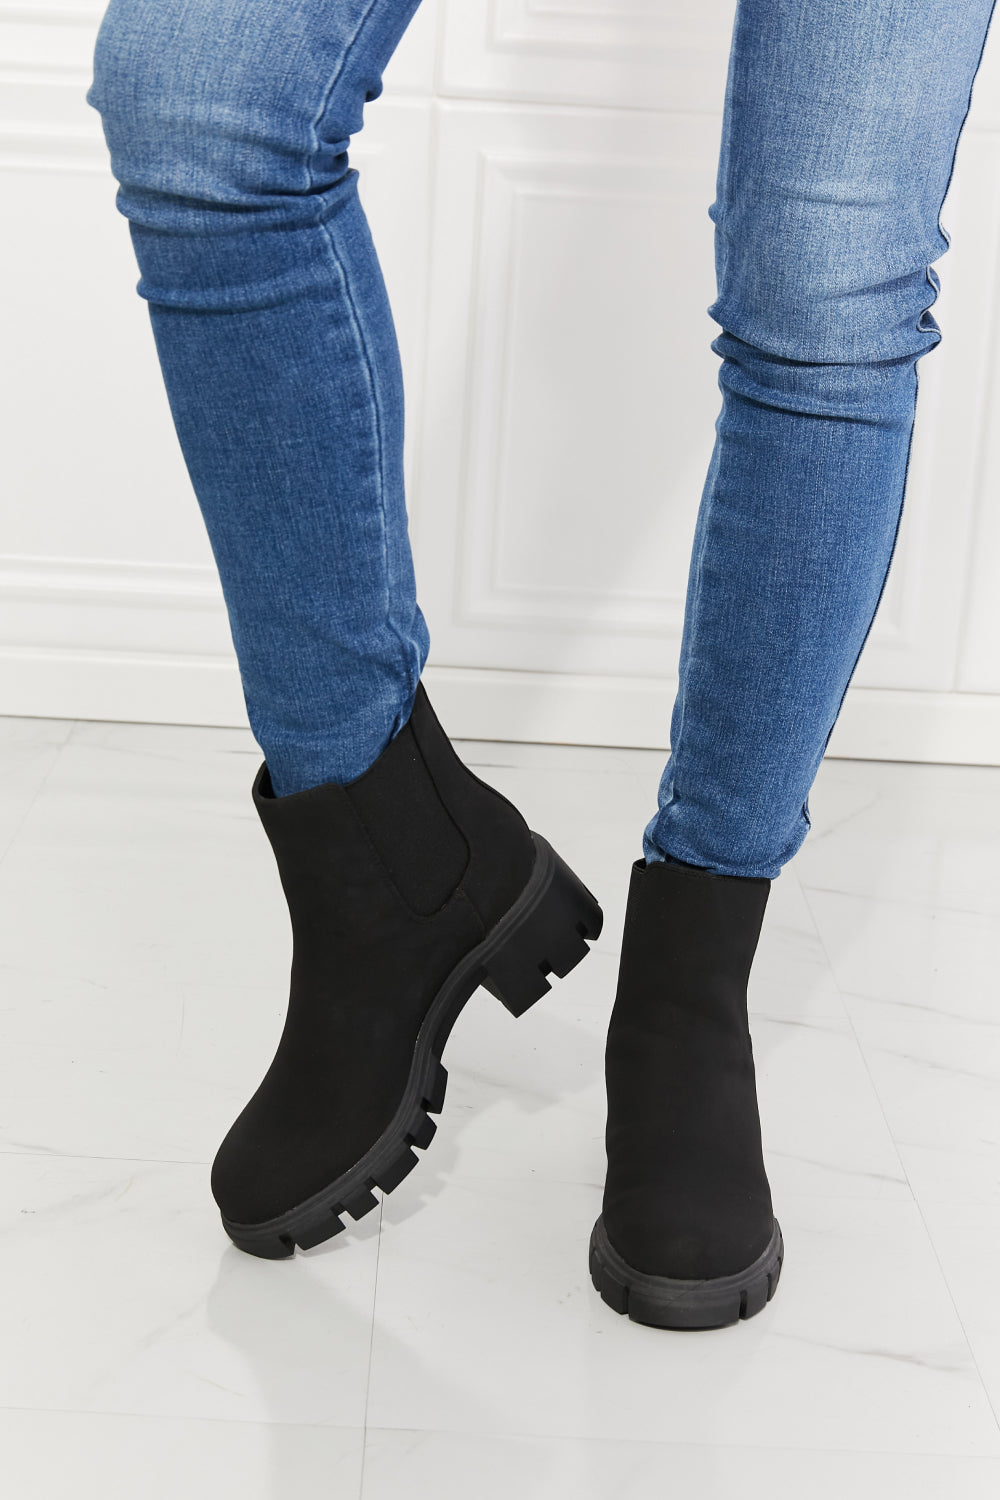 MMShoes Work For It Matte Lug Sole Chelsea Boots in Black - AllIn Computer